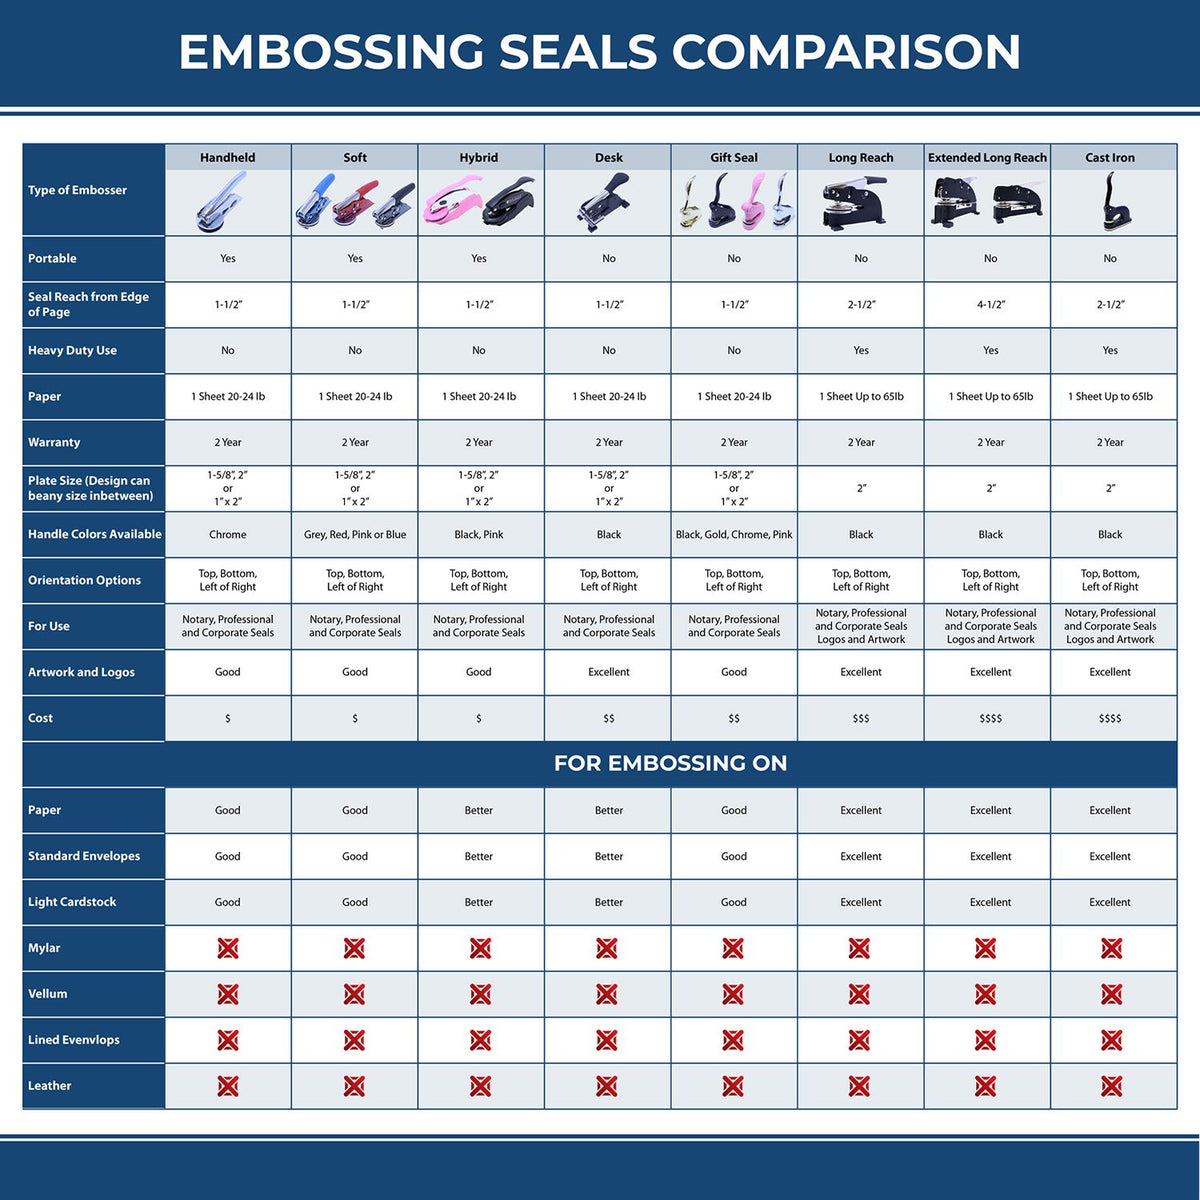 A comparison chart for the different types of mount models available for the Extended Long Reach Massachusetts Surveyor Embosser.